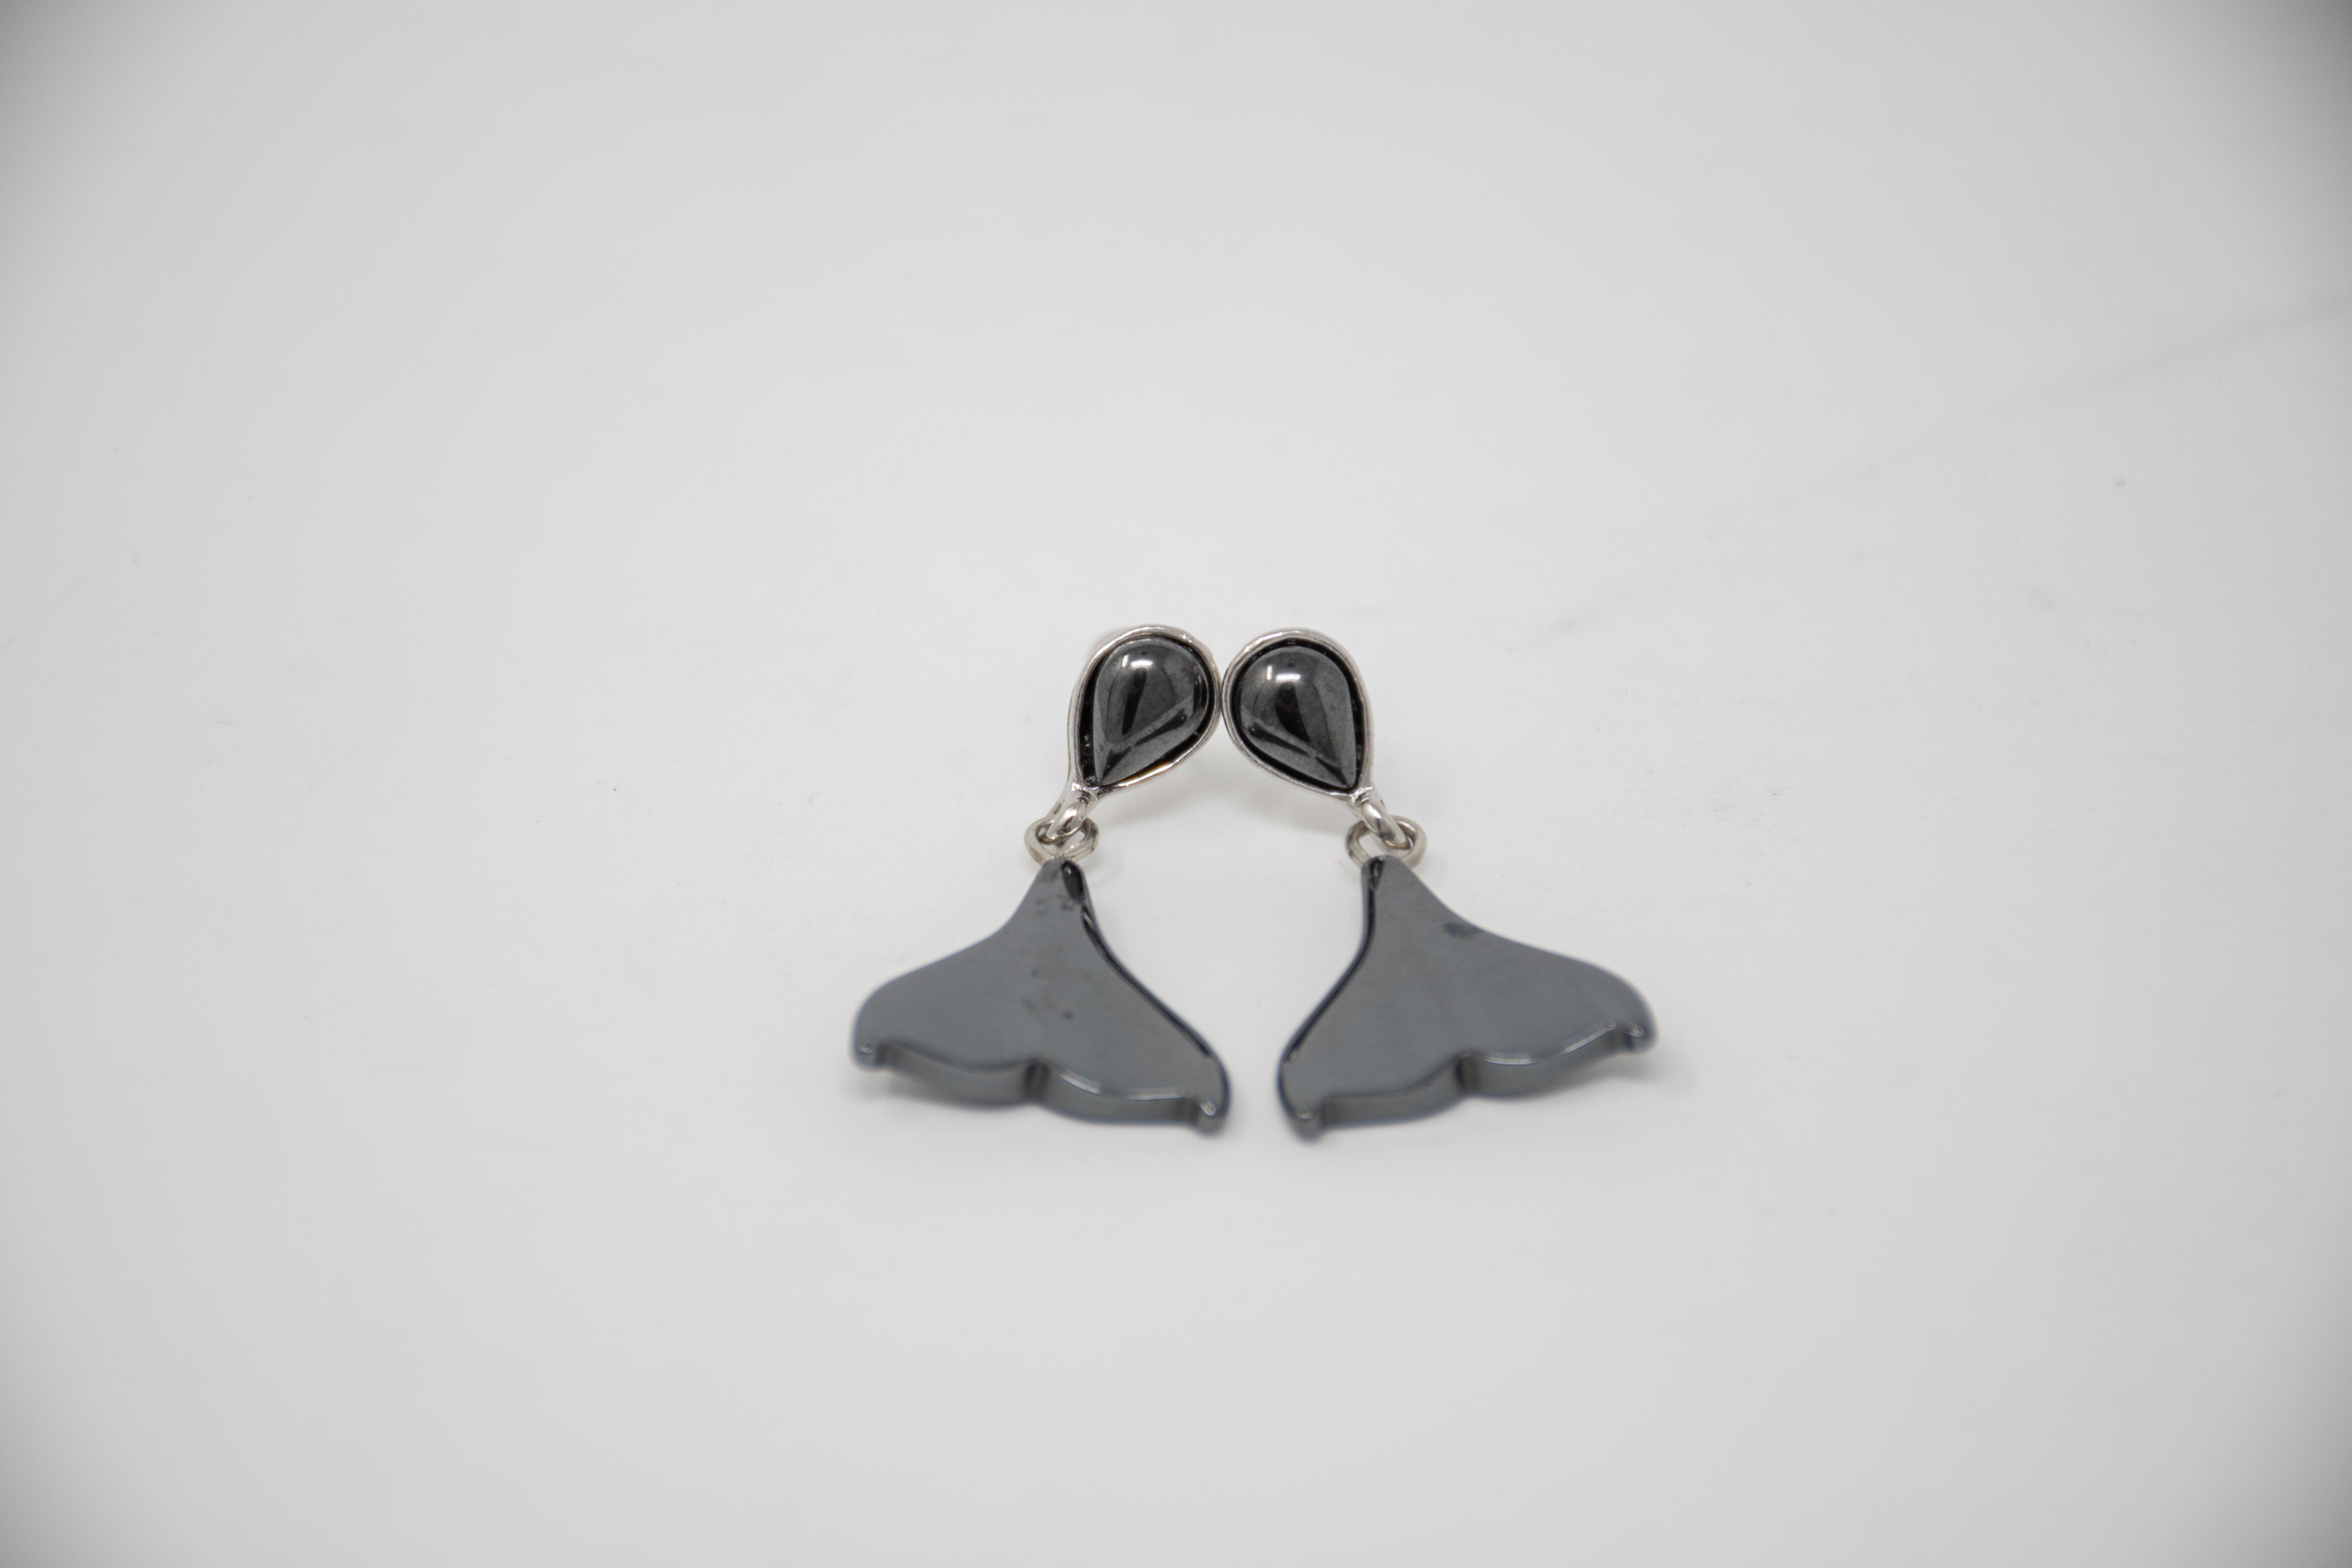  Whales Tail Earrings